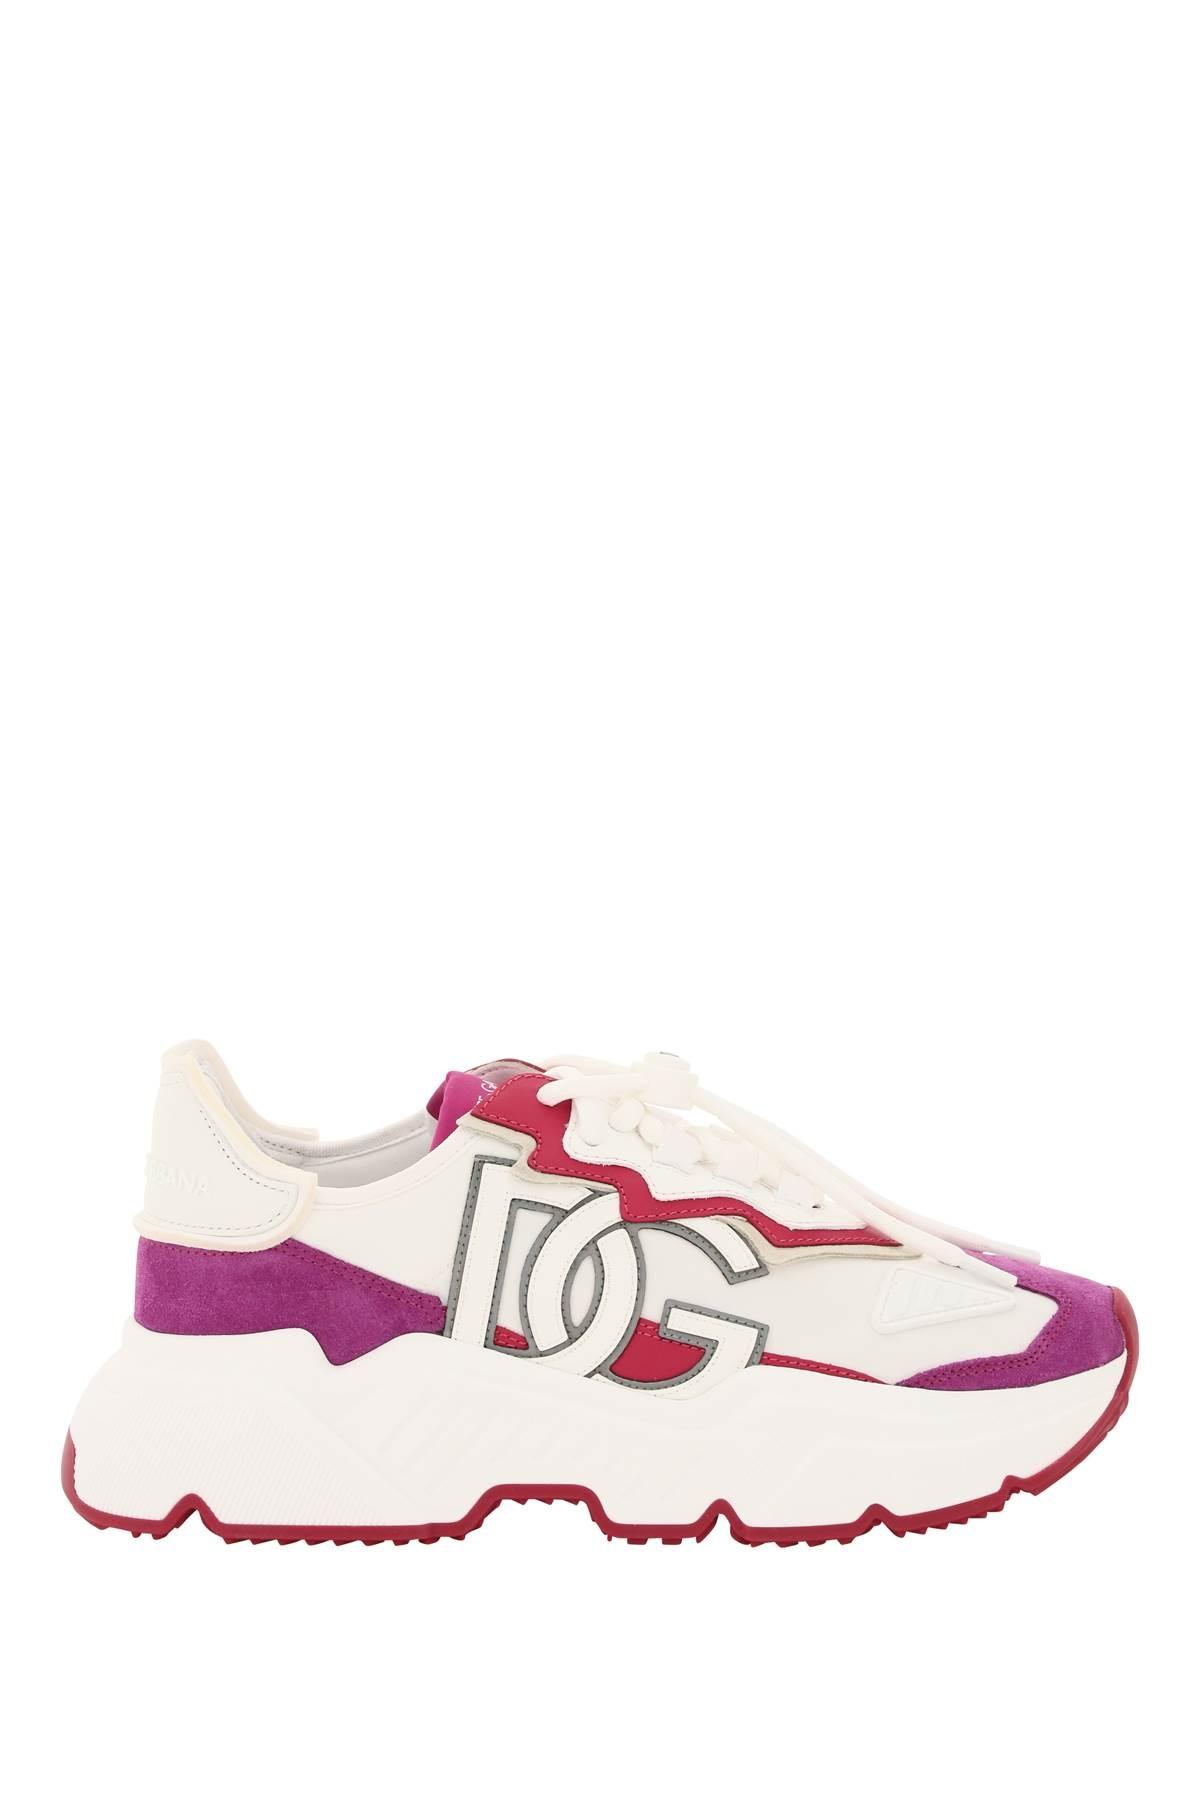 Dolce & Gabbana Daymaster Sneakers in Pink | Lyst